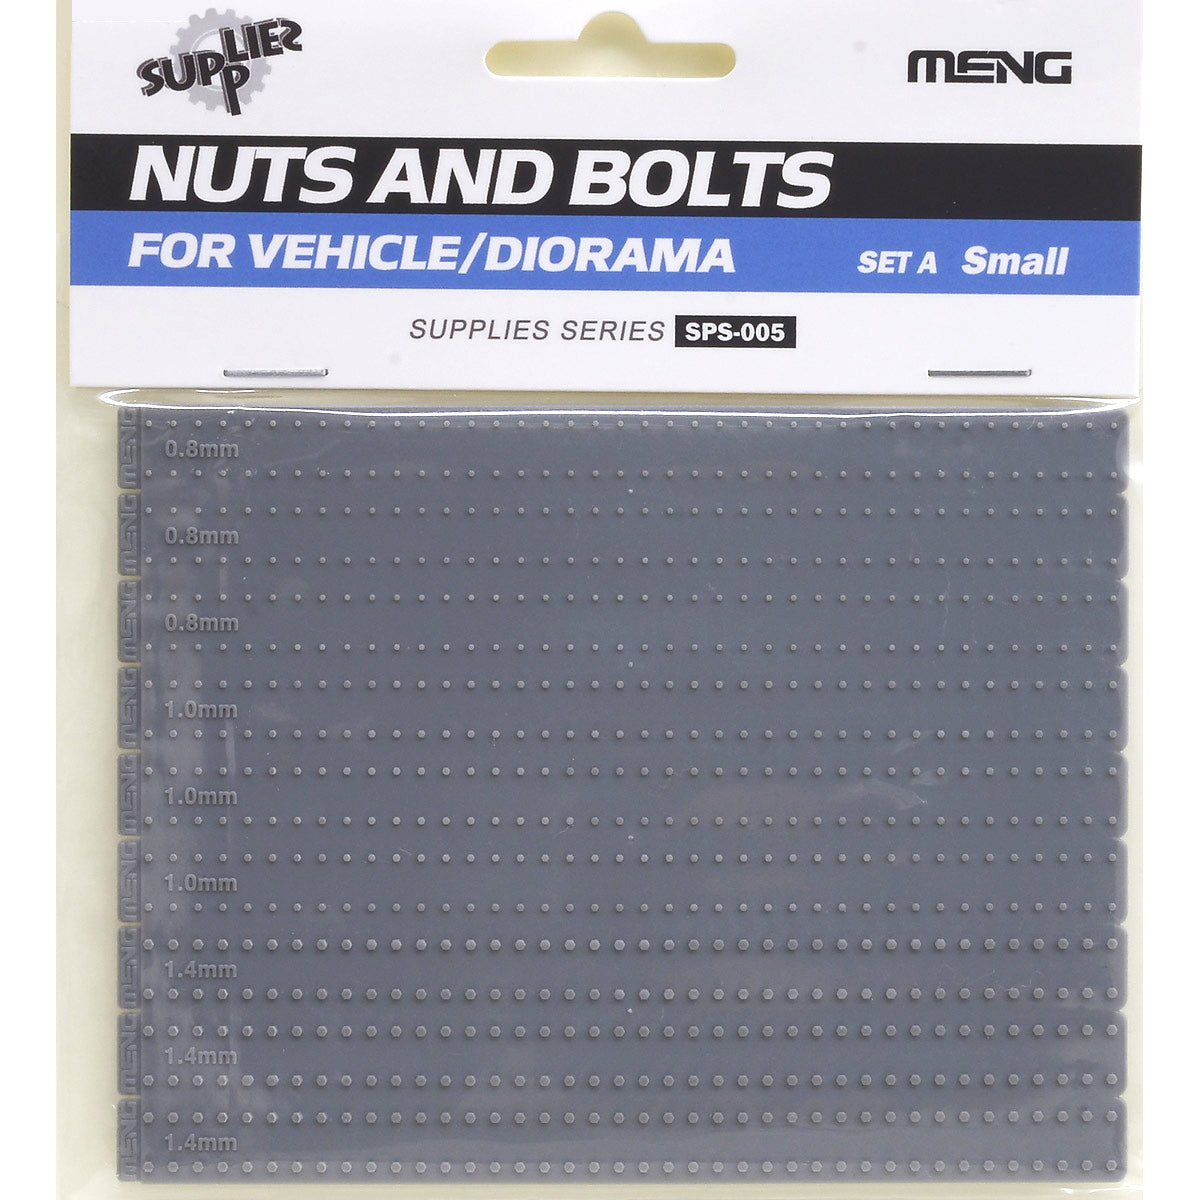 Meng Nuts And Bolts Set A Small SPS-005